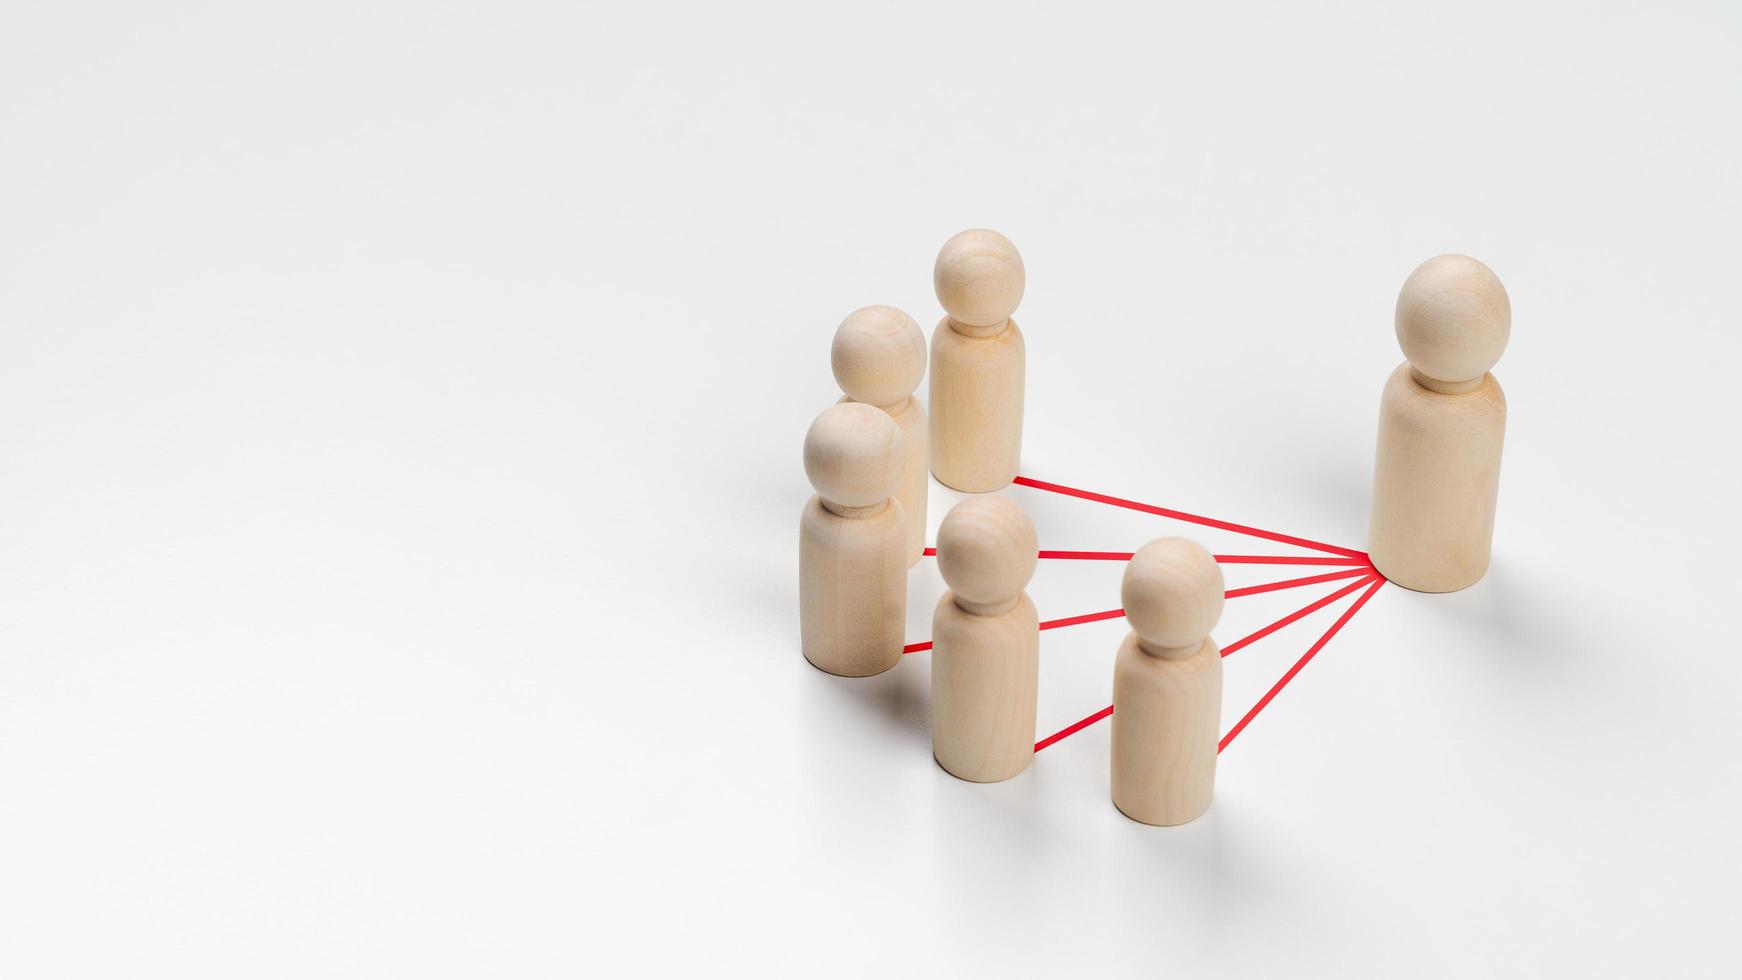 Wooden peg dolls are connected together with red lines on white background. Teamwork, Leadership, Business, human resource management Concept photo